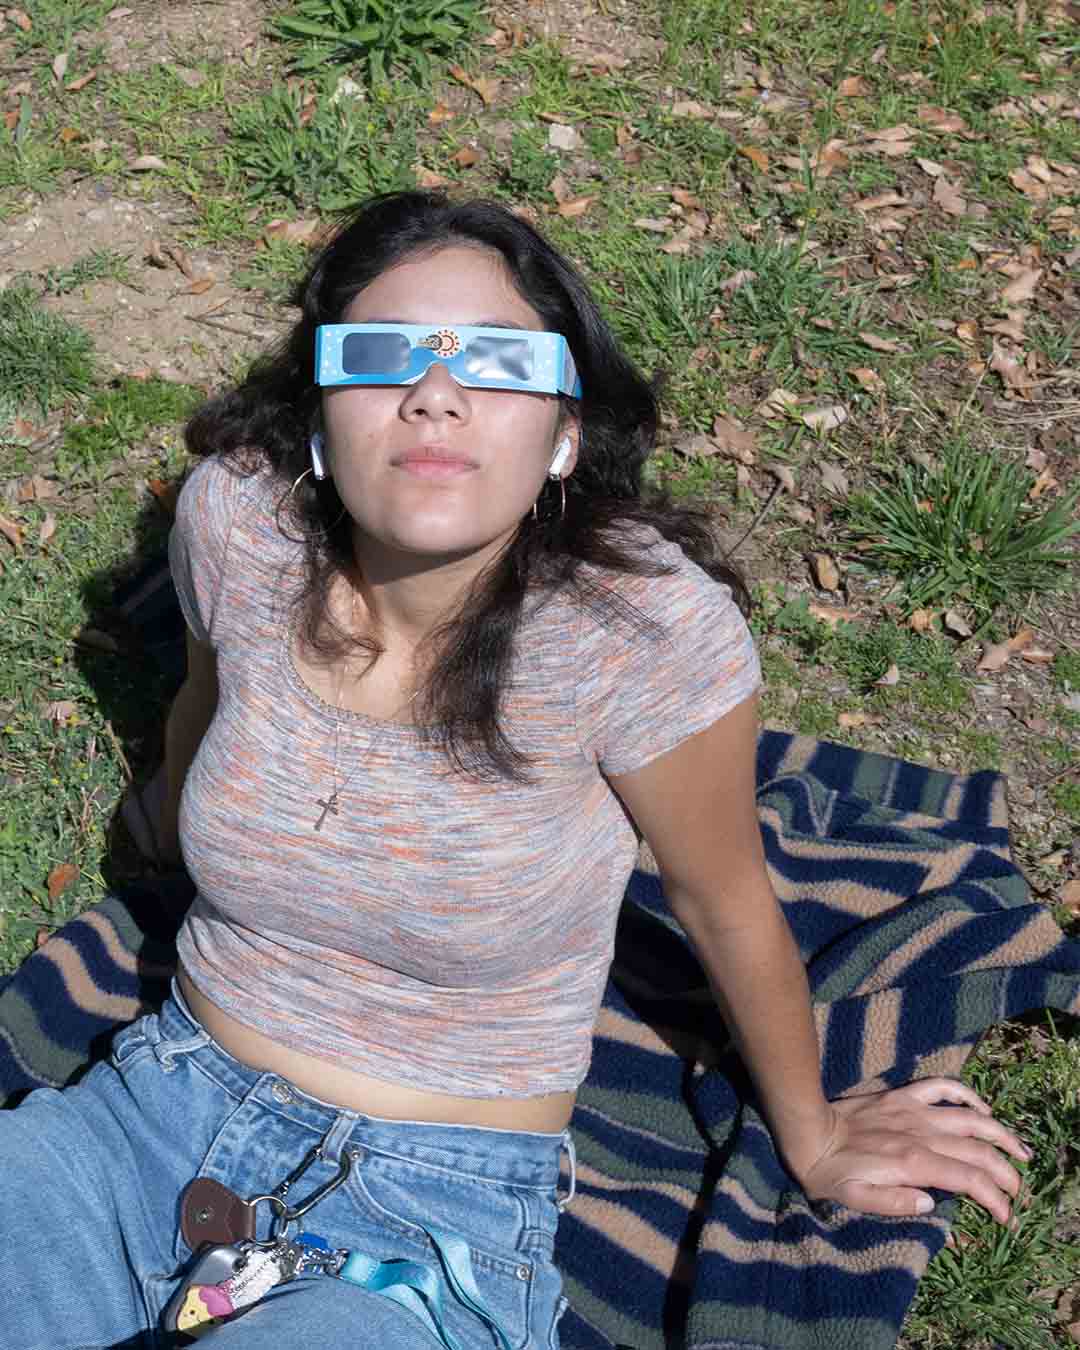 Student looks up wearing solar glasses